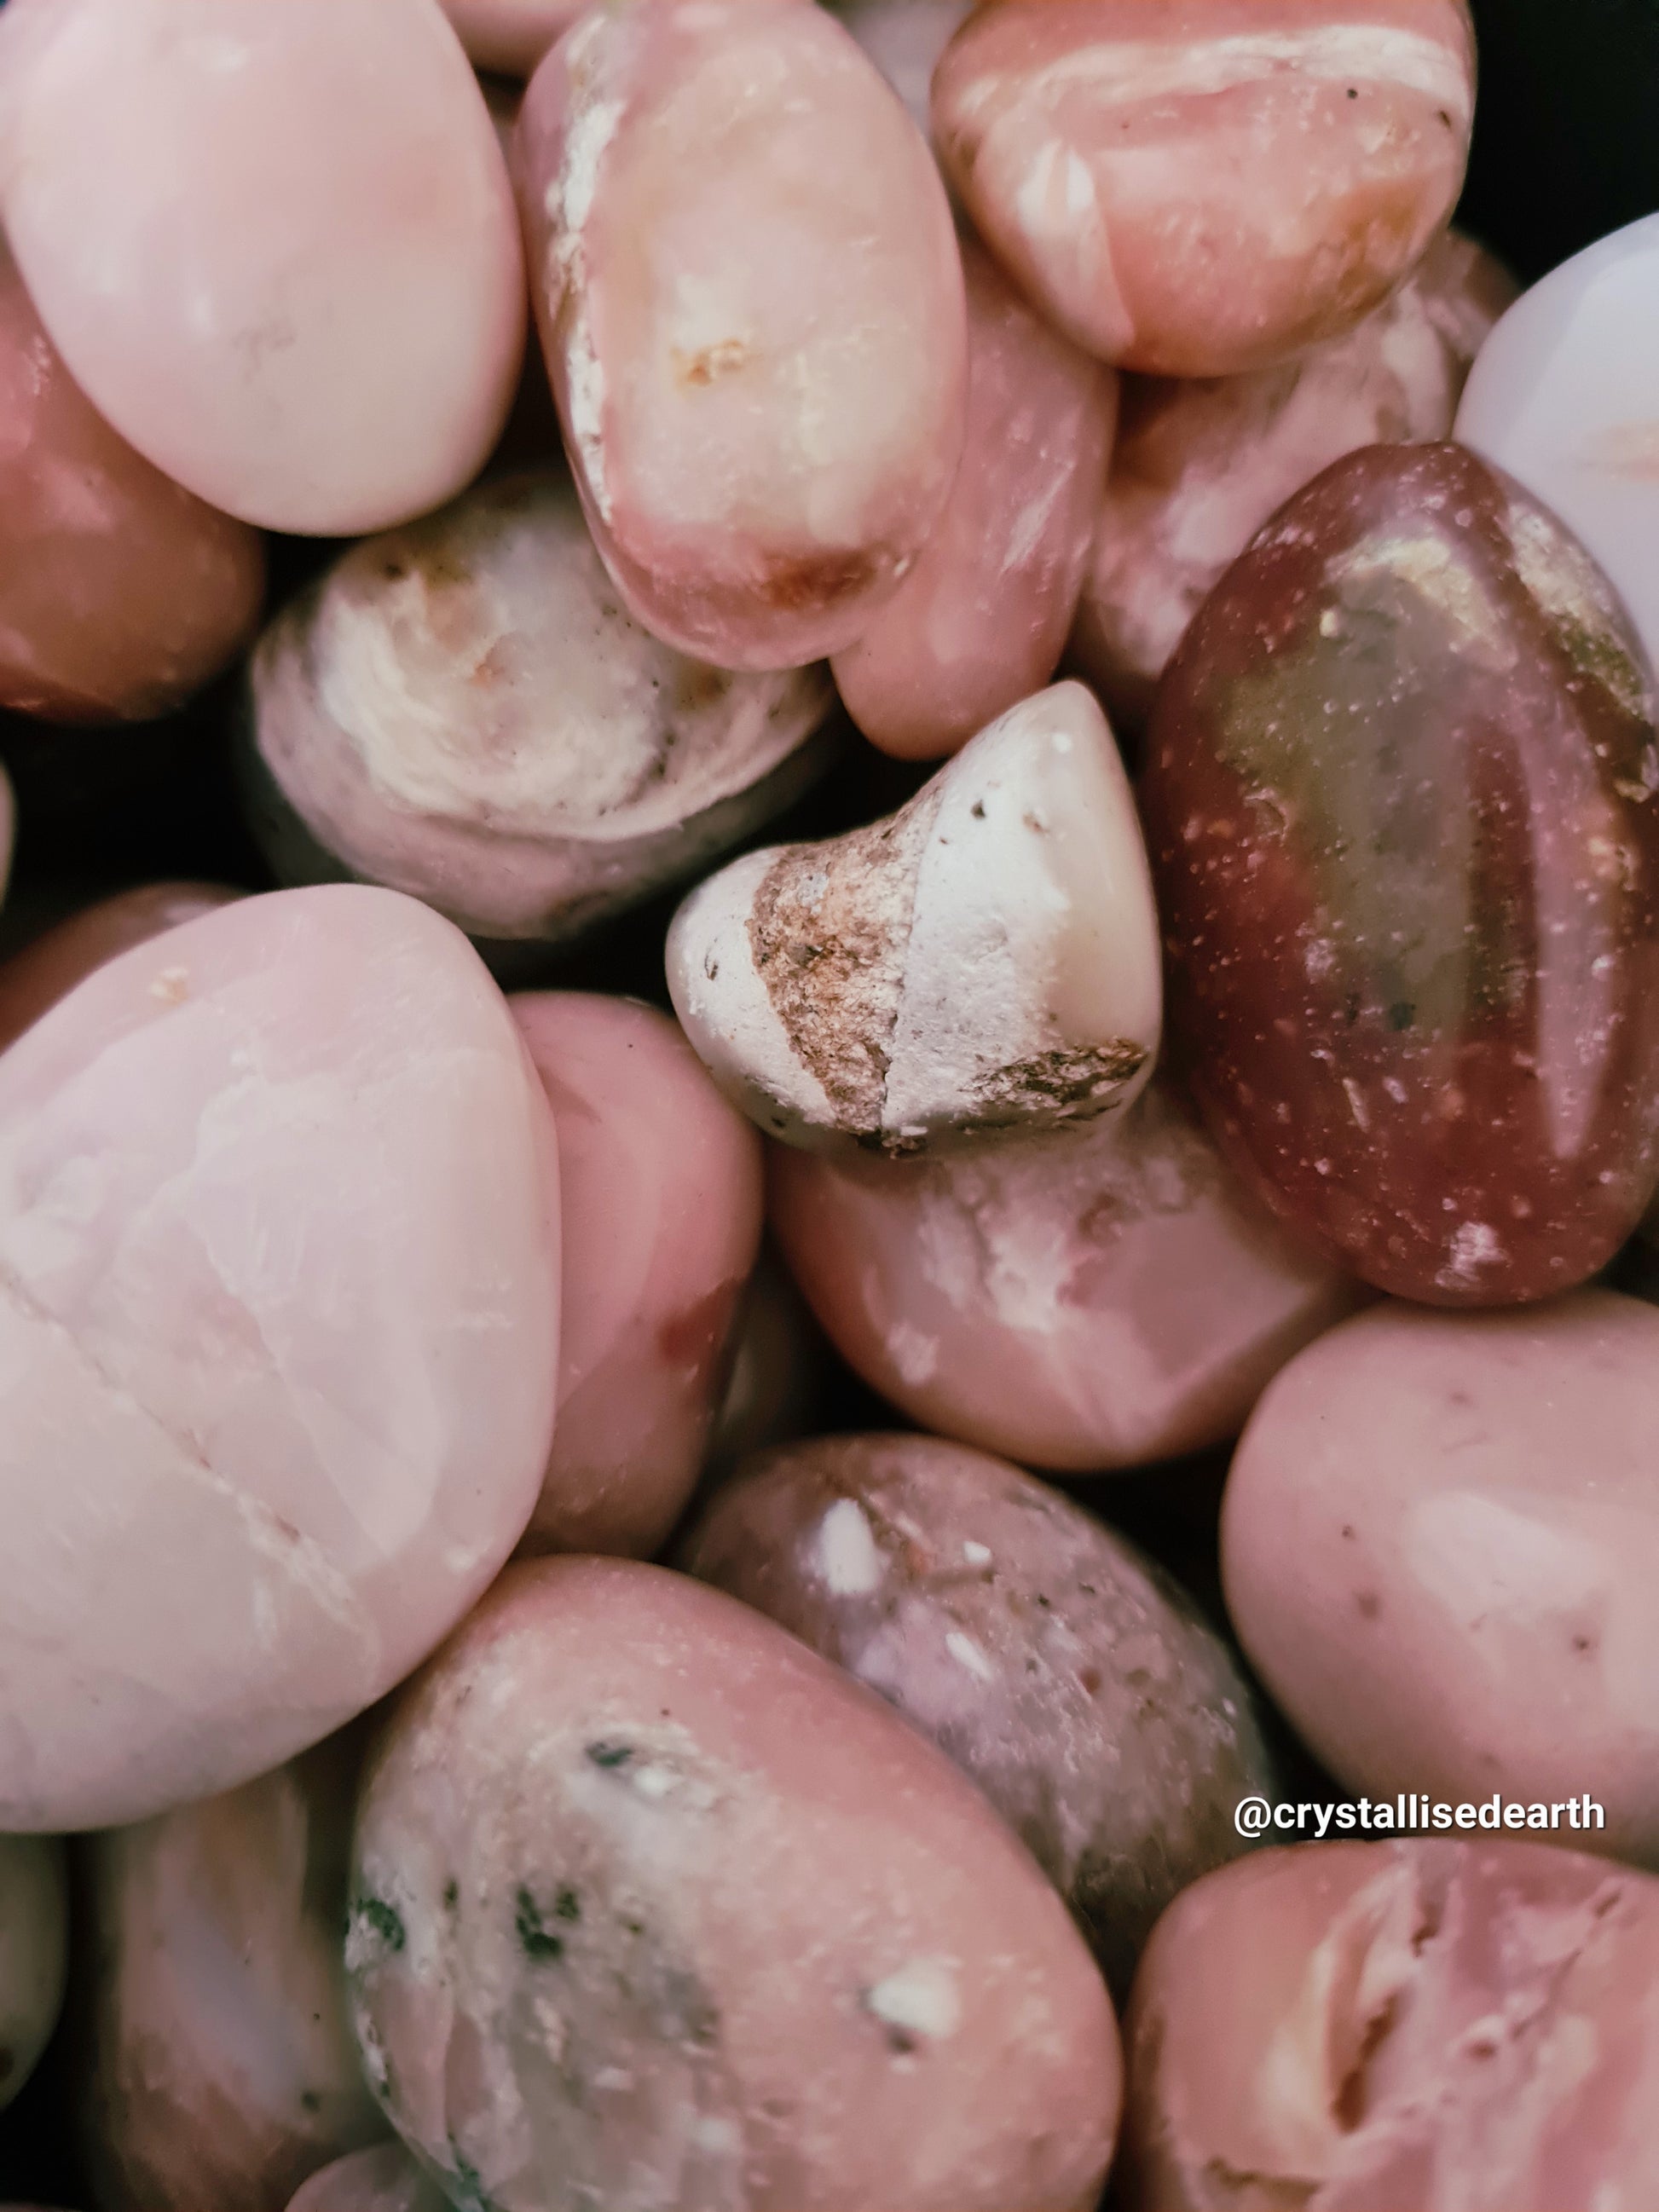 Mixed Pink Opal Tumblestones in shades from light, baby pink to darker Rose Pinks, with natural inclusions and surfaces.